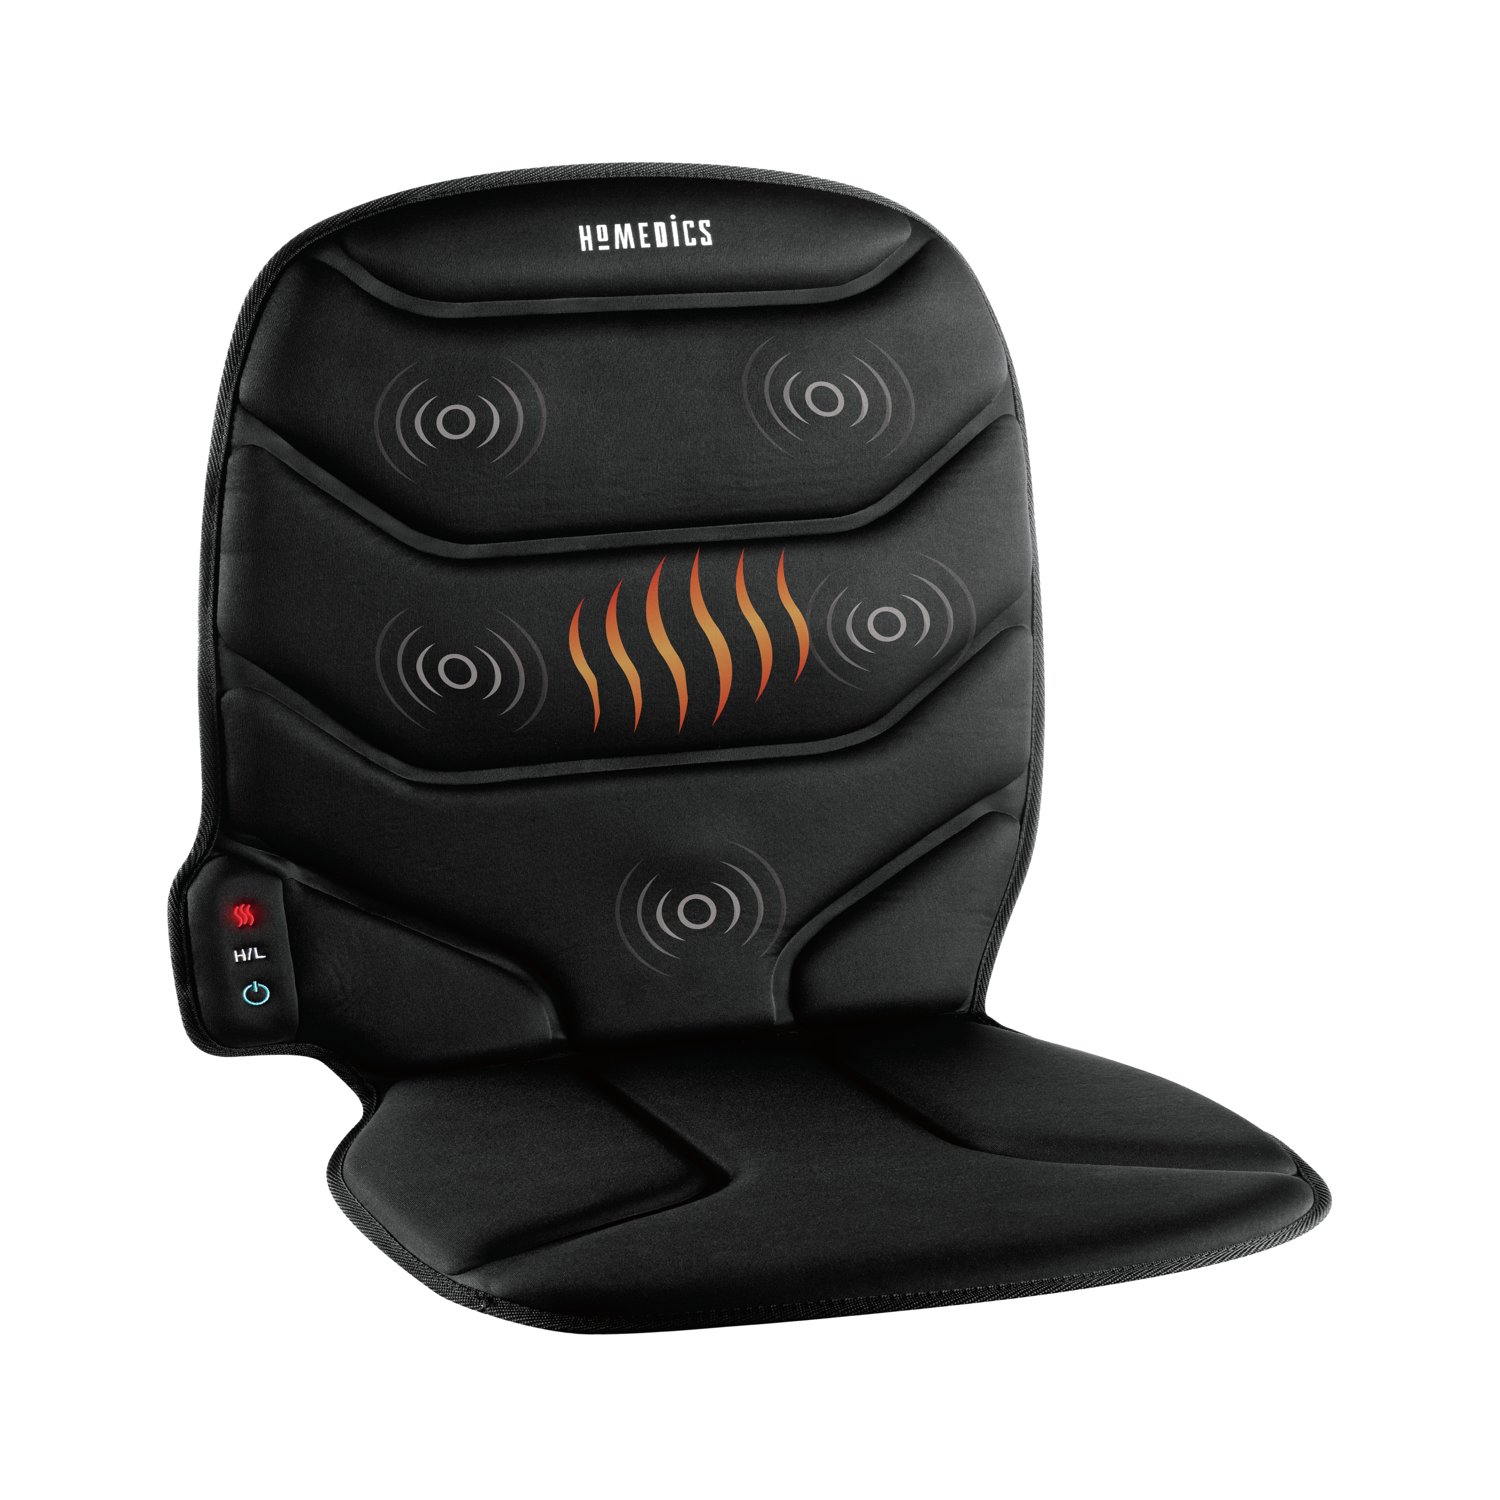 HoMedics Massage Comfort Cushion with Heat, Integrated Control for Back - image 1 of 9